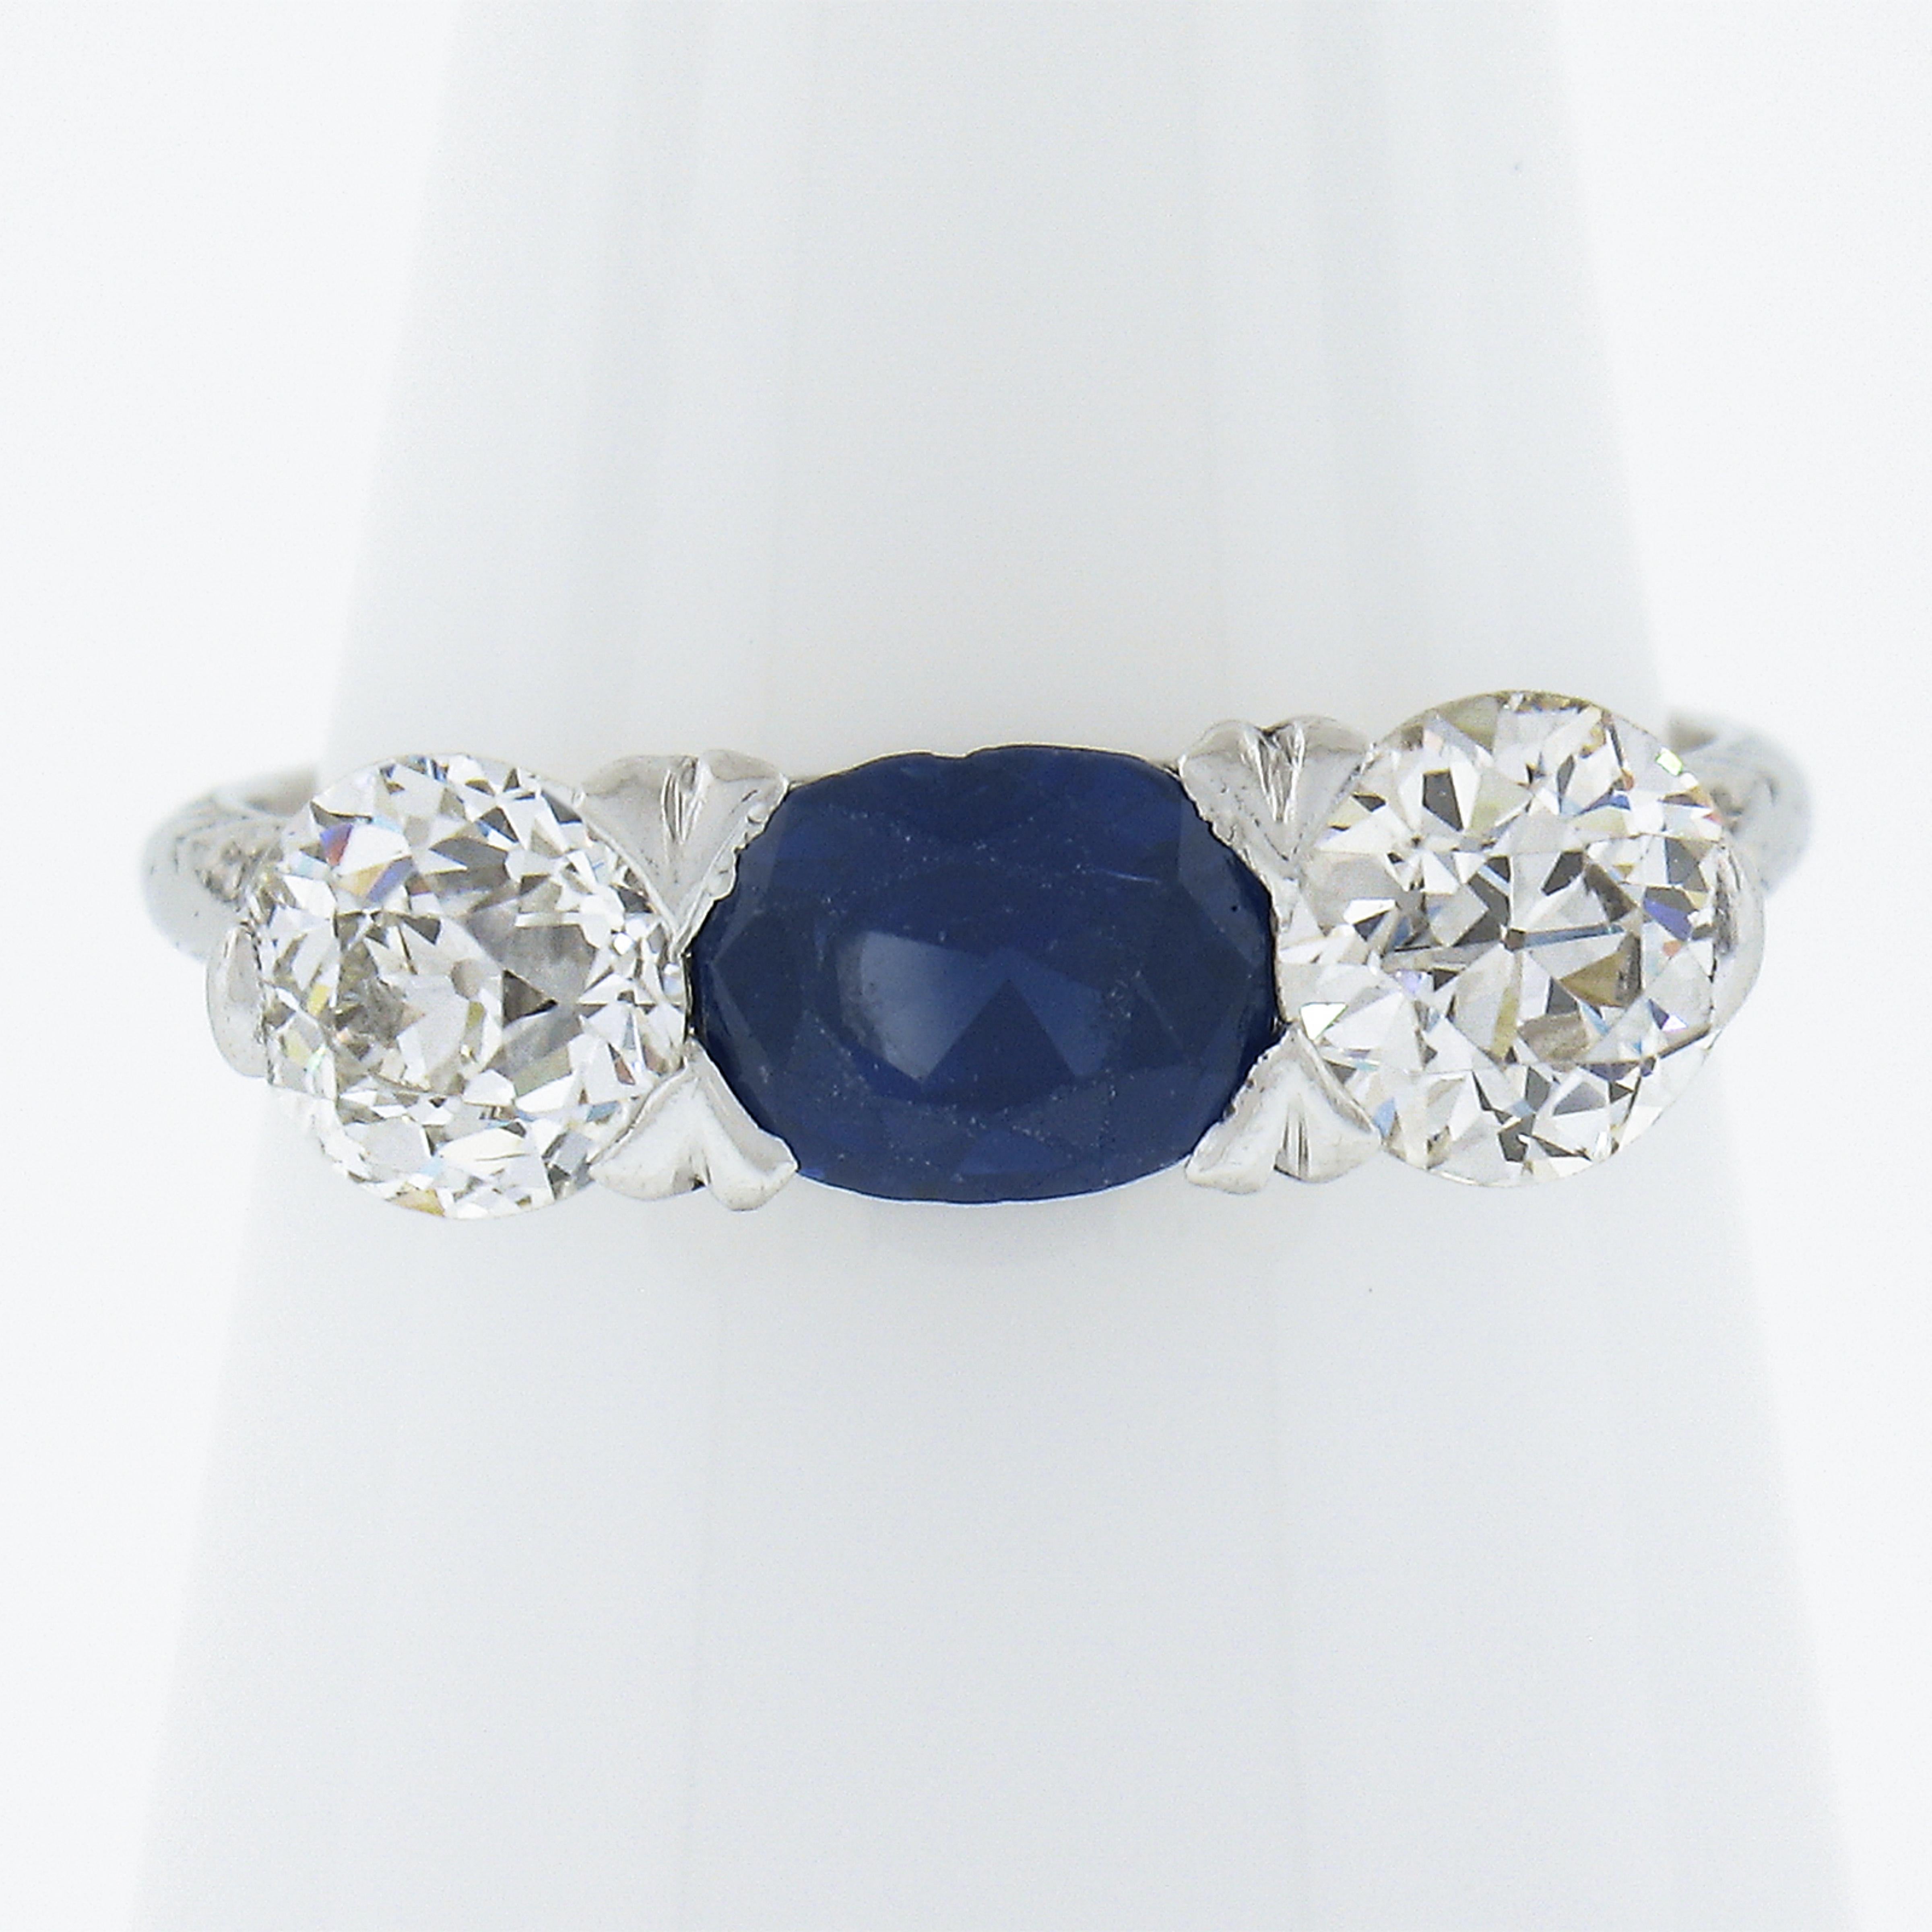 --Stone(s):--
(1) Natural Genuine Sapphire - Cushion Cut - Prong Set - True Royal Blue Color - 0.80-1.0ct (approx. based on certification)
** See Certification Details Below for Complete Info **
(2) Natural Genuine Diamonds - Old European Cut -